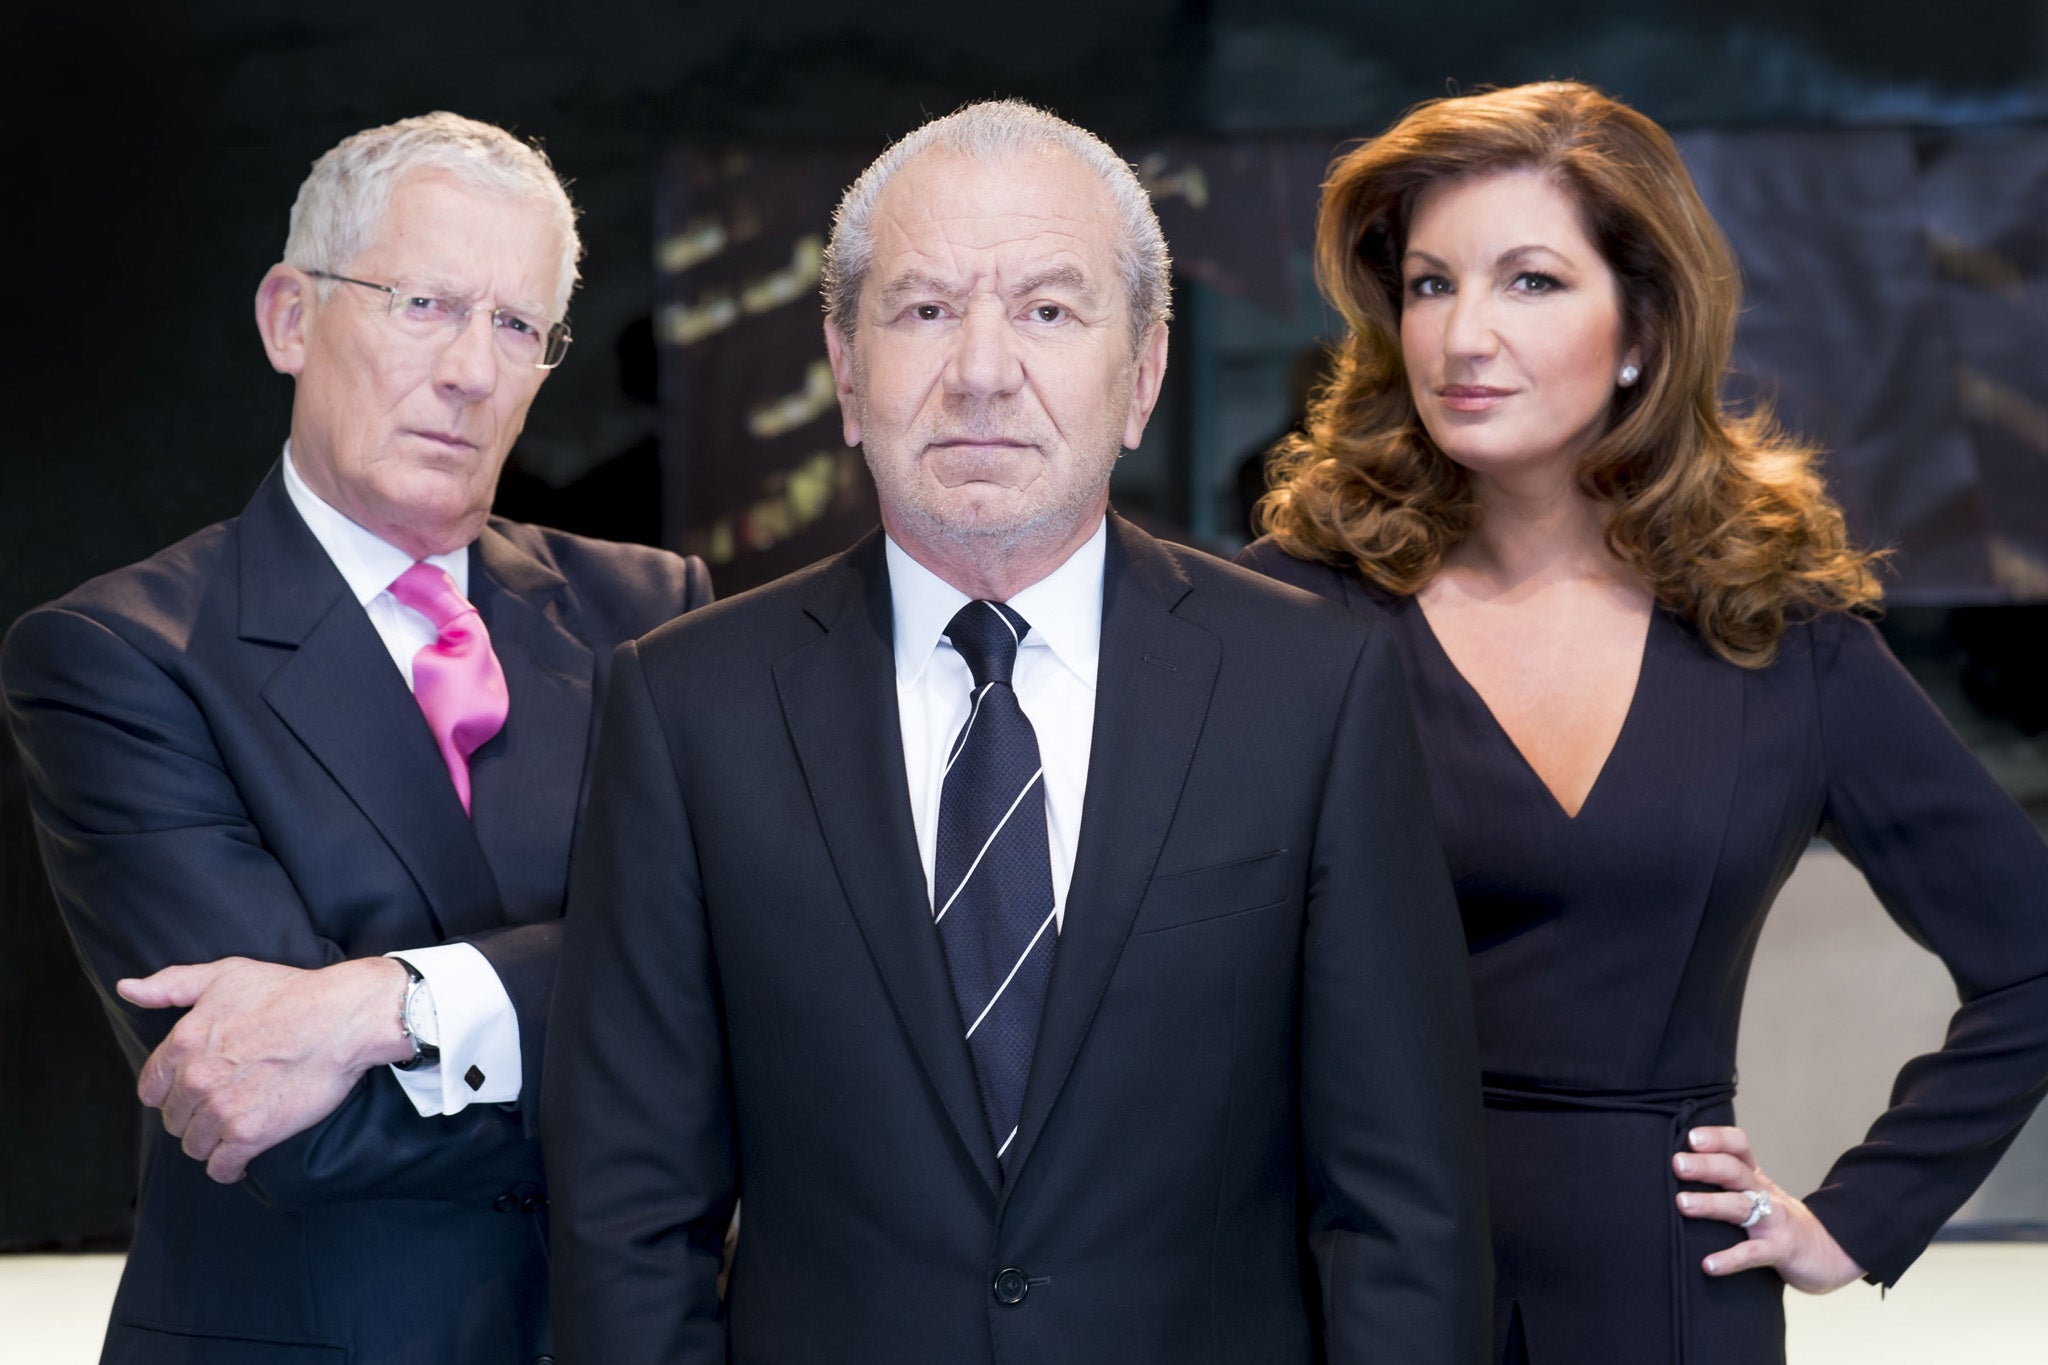 Nick Hewer, Lord Alan Sugar, Karren Brady are returning for a tenth series of The Apprentice